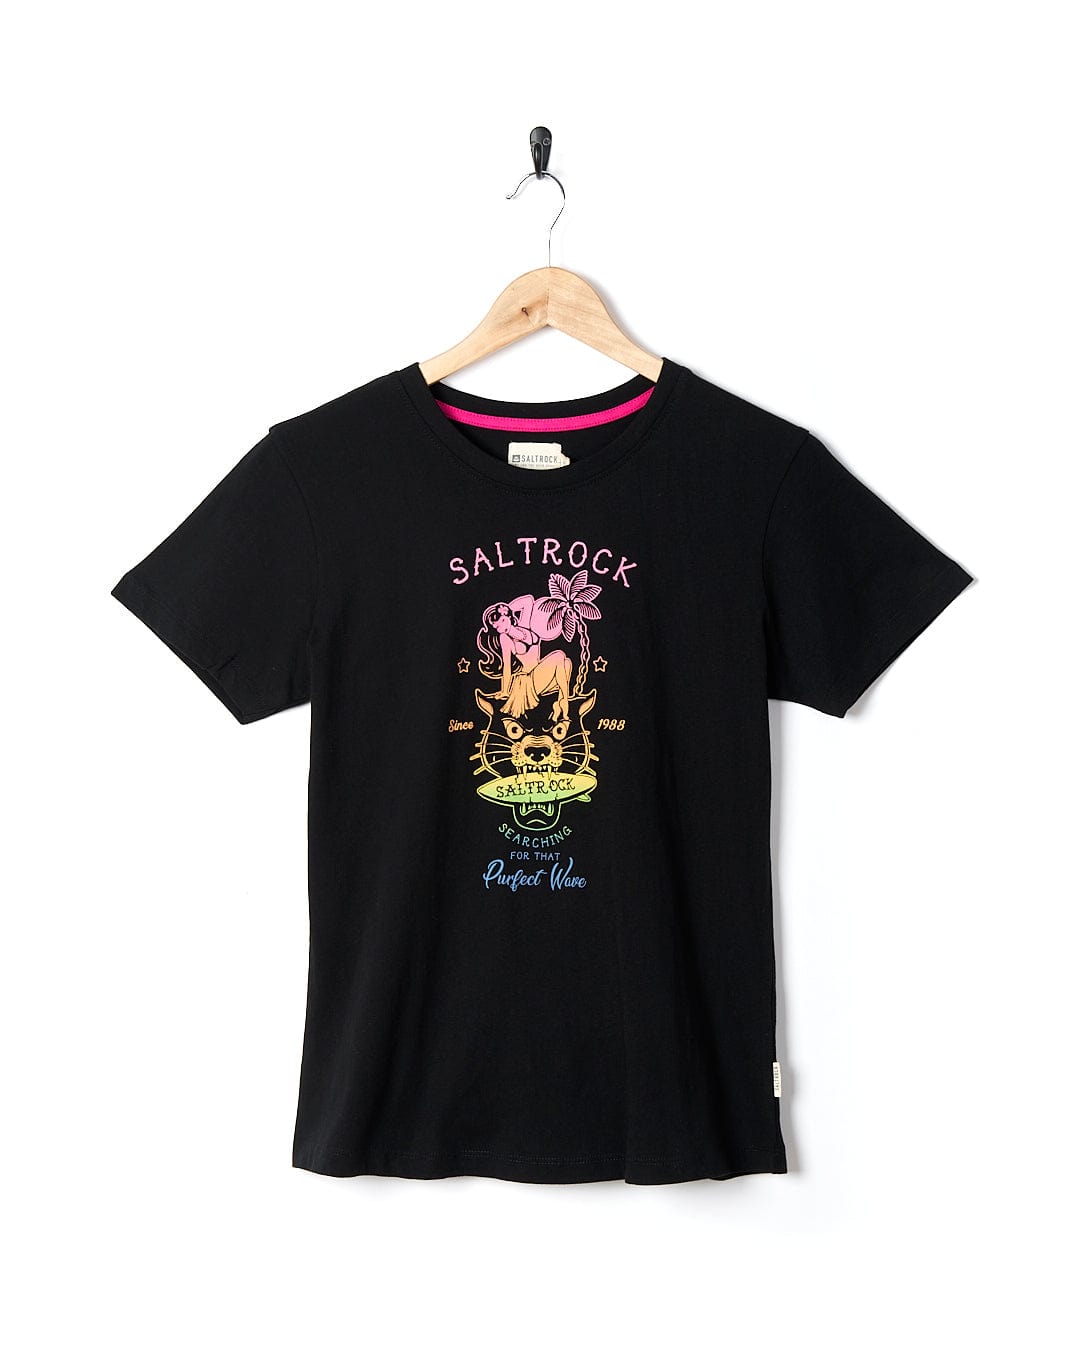 A Saltrock Purfect Wave Gradient - Womens Short Sleeve T-Shirt - Black with the brand name "Saltrock" on it.